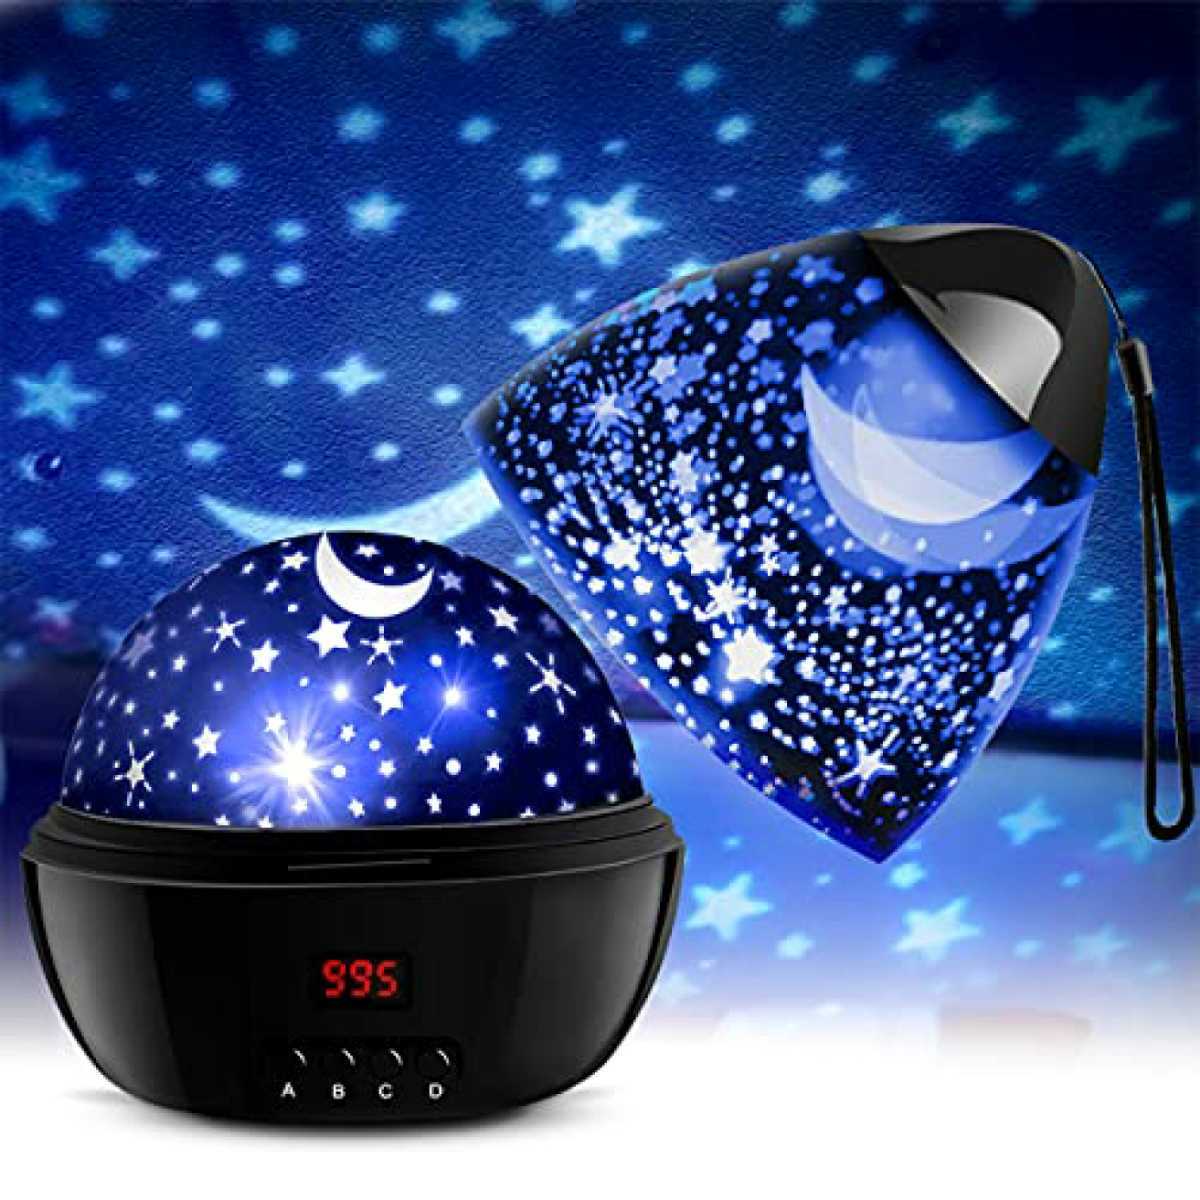  new goods unused Star Sky projector SCOPOW Night light colorful . star empty Pro je comb .n Night light LED timer auto off 360 times rotation 